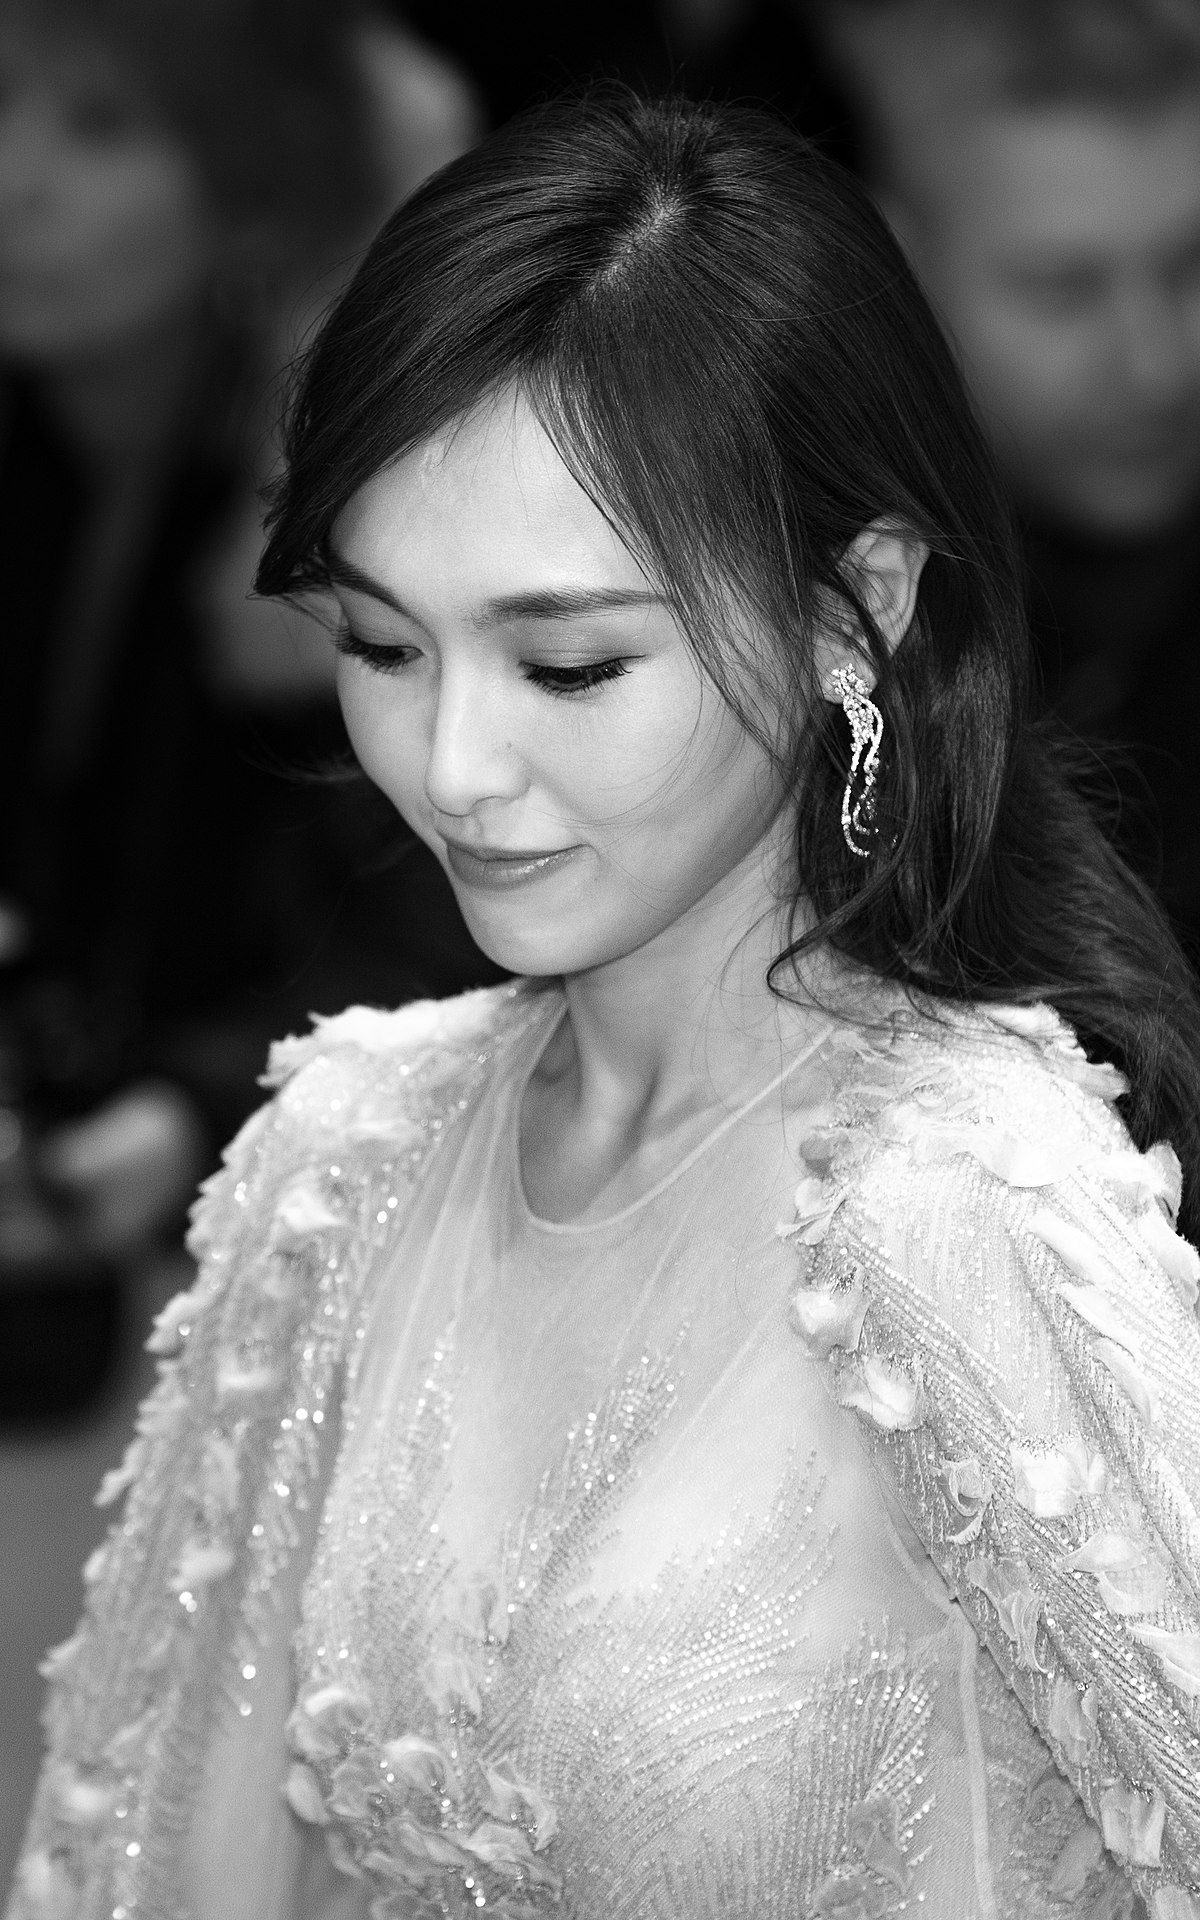 "Tang Yan: A Multifaceted Talent Illuminating the Entertainment World"